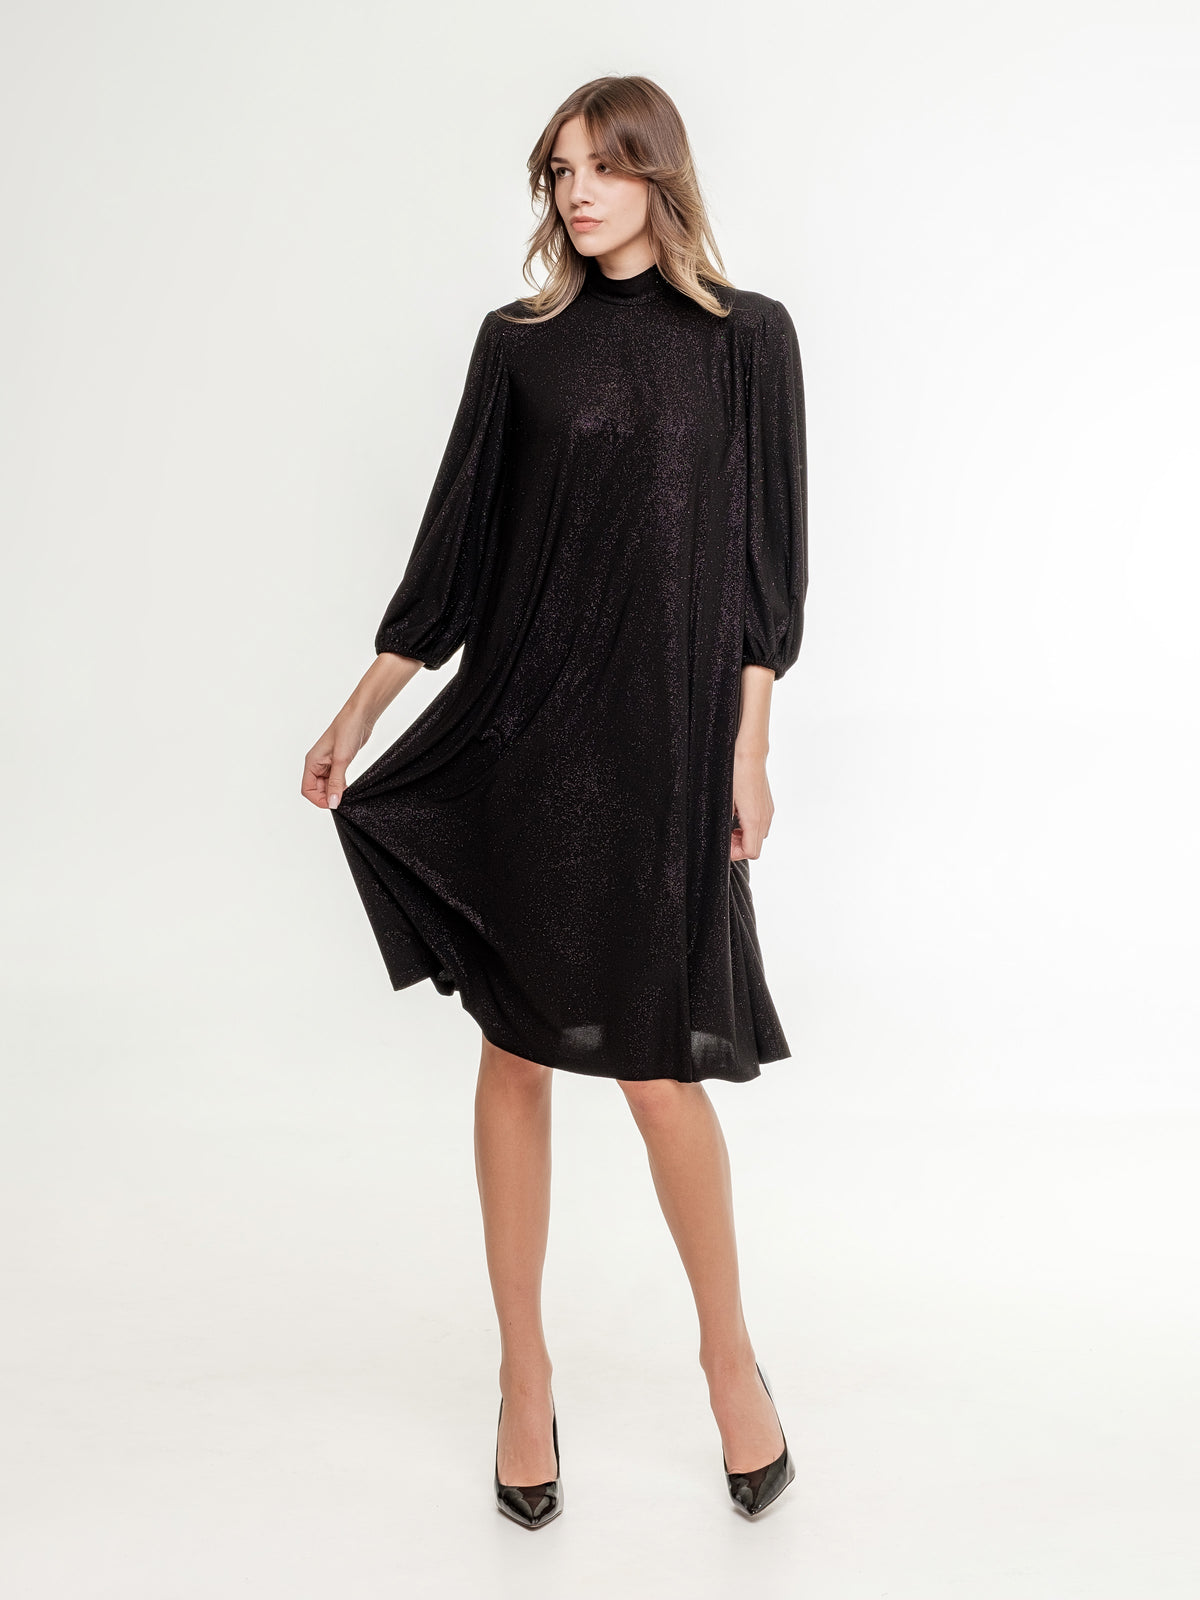 short_glossy_black_dress_with_high_neck_line 3/4 sleeves front view